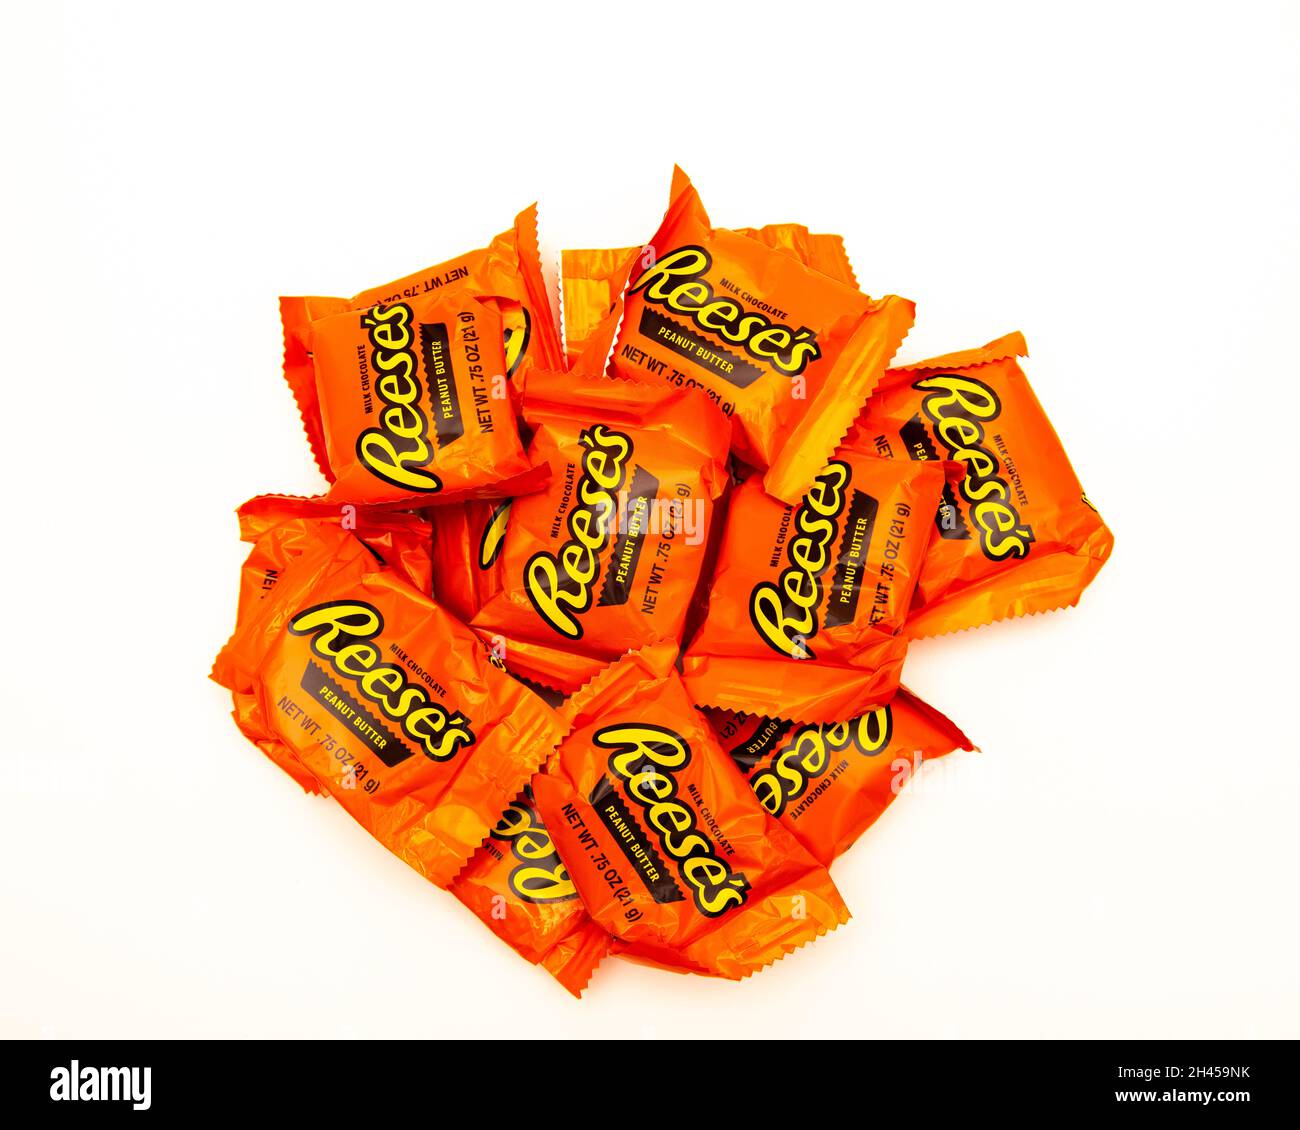 A pile of Reese's peanut butter cups in bright orange wrappers, made with milk chocolate, a tasty gluten free treat or snack. Stock Photo